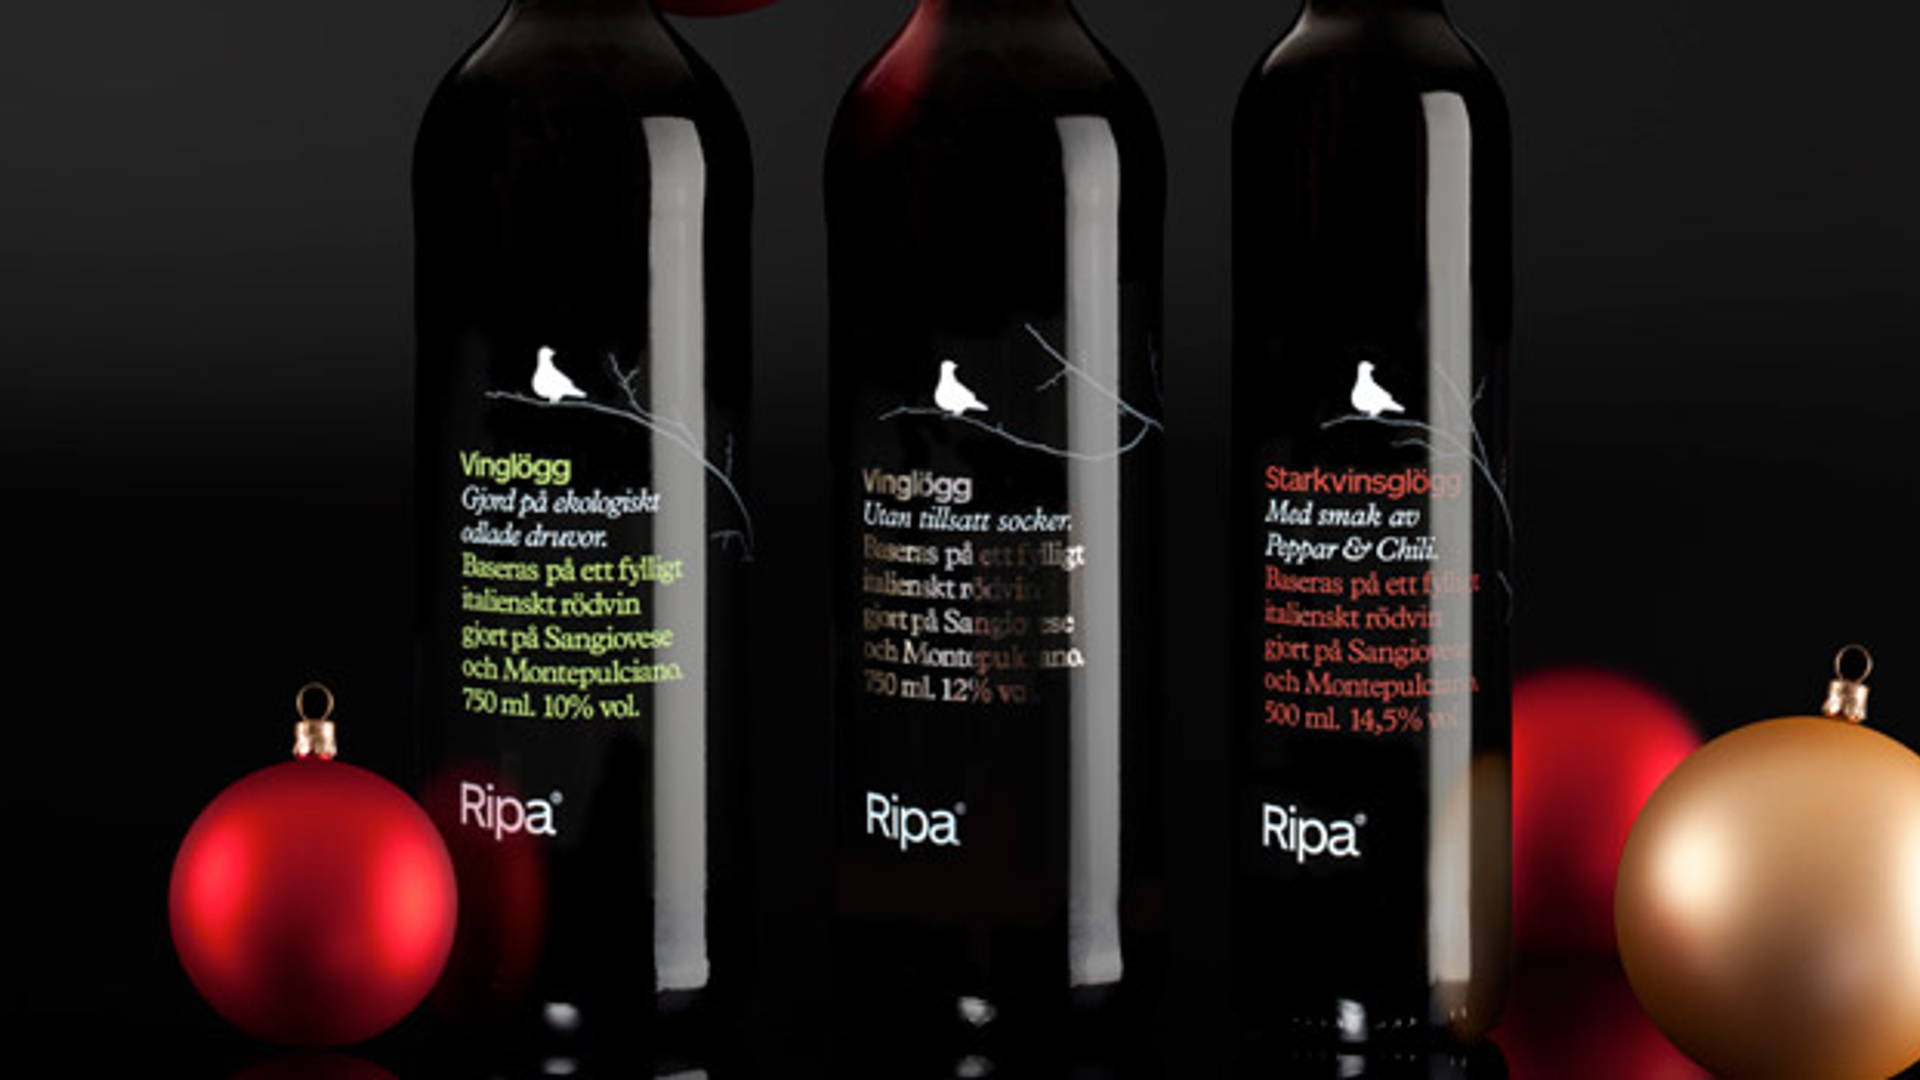 Featured image for Ripa Wine